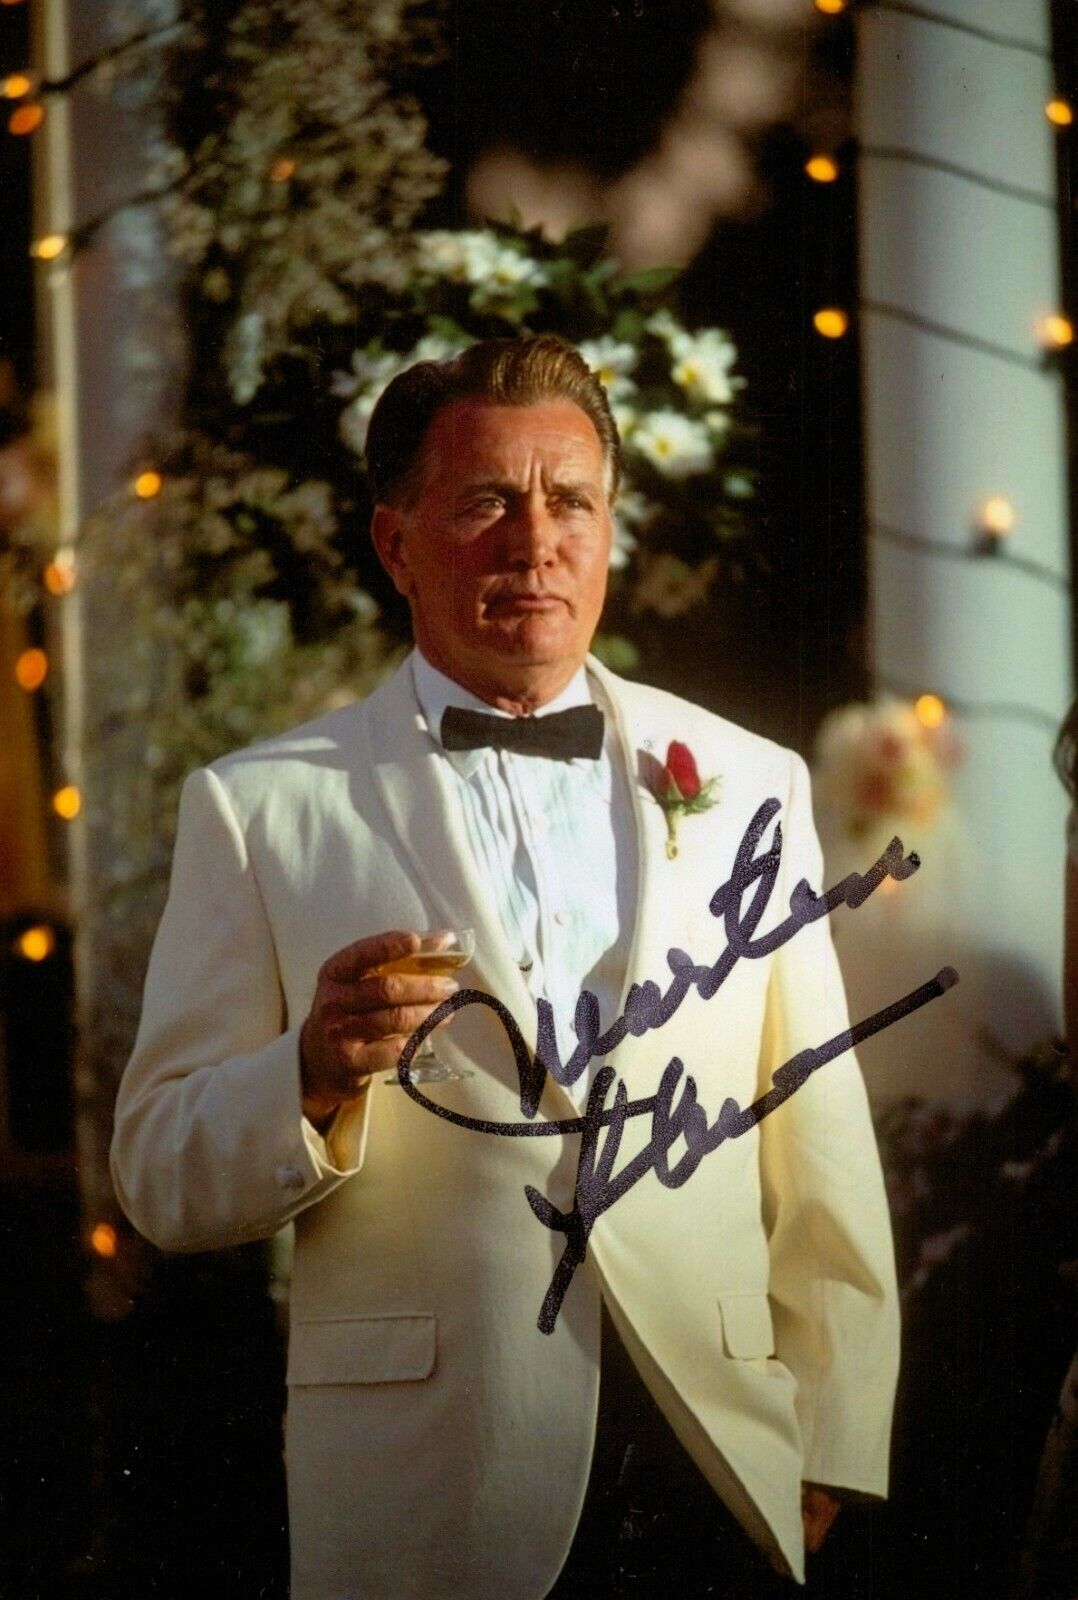 Martin Sheen Signed 6x4 Photo Poster painting West Wing Badlands The Departed Autograph + COA